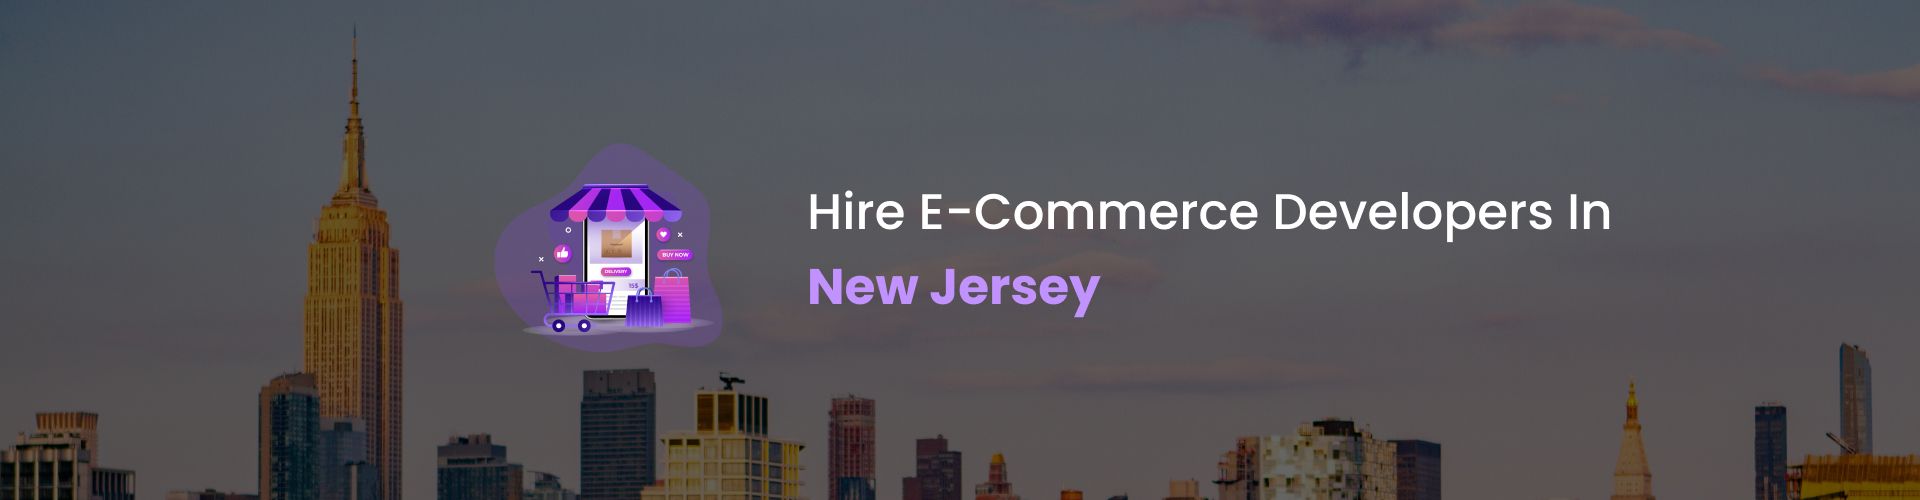 hire ecommerce developers in new jersey